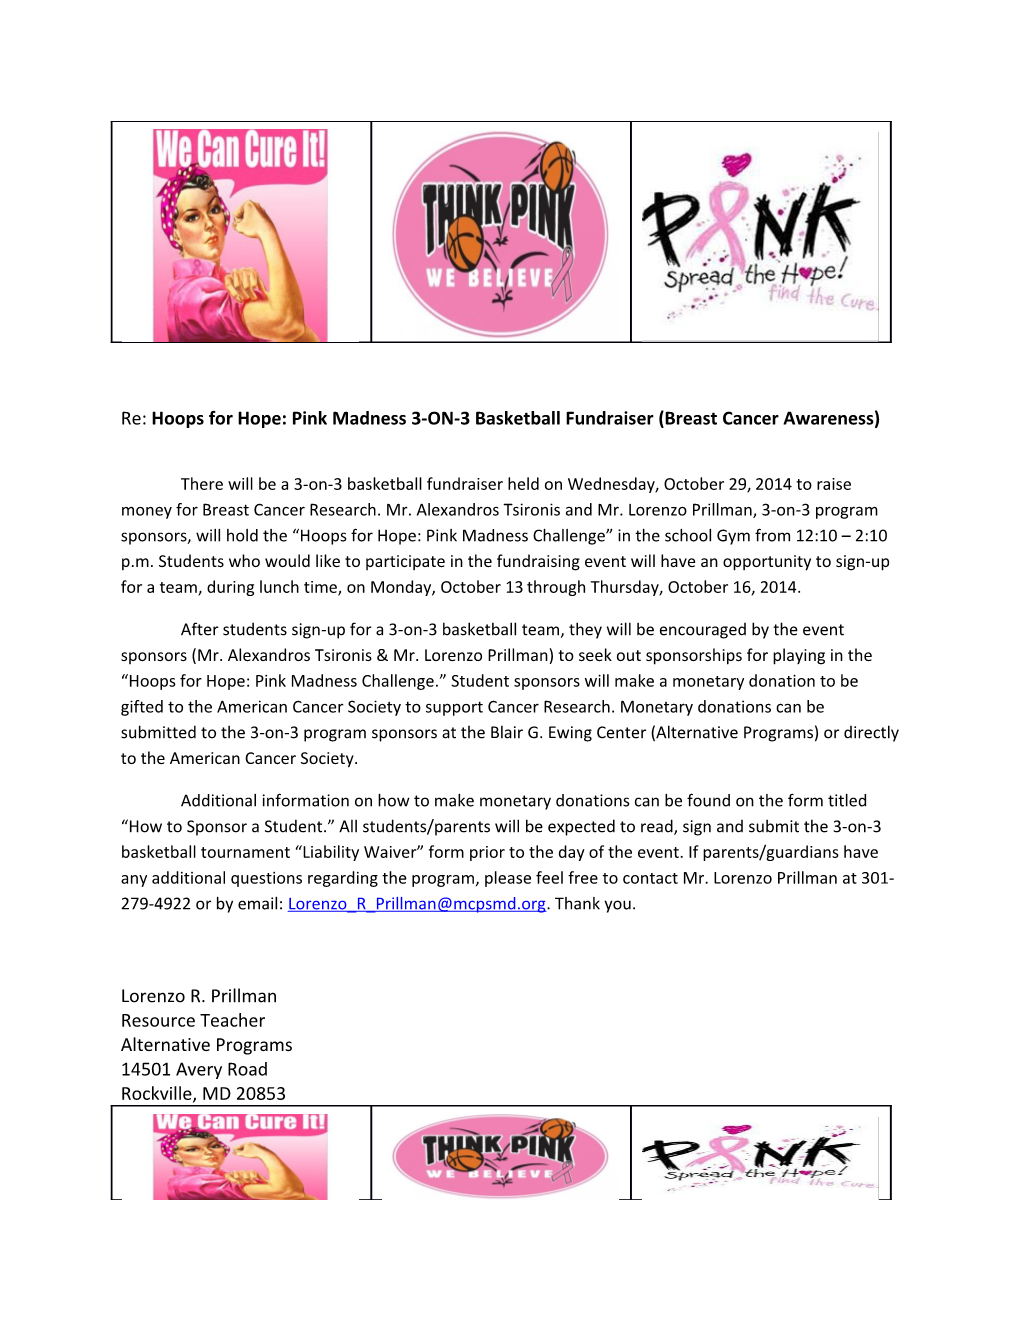 Re: Hoops for Hope: Pink Madness 3-ON-3 Basketball Fundraiser (Breast Cancer Awareness)